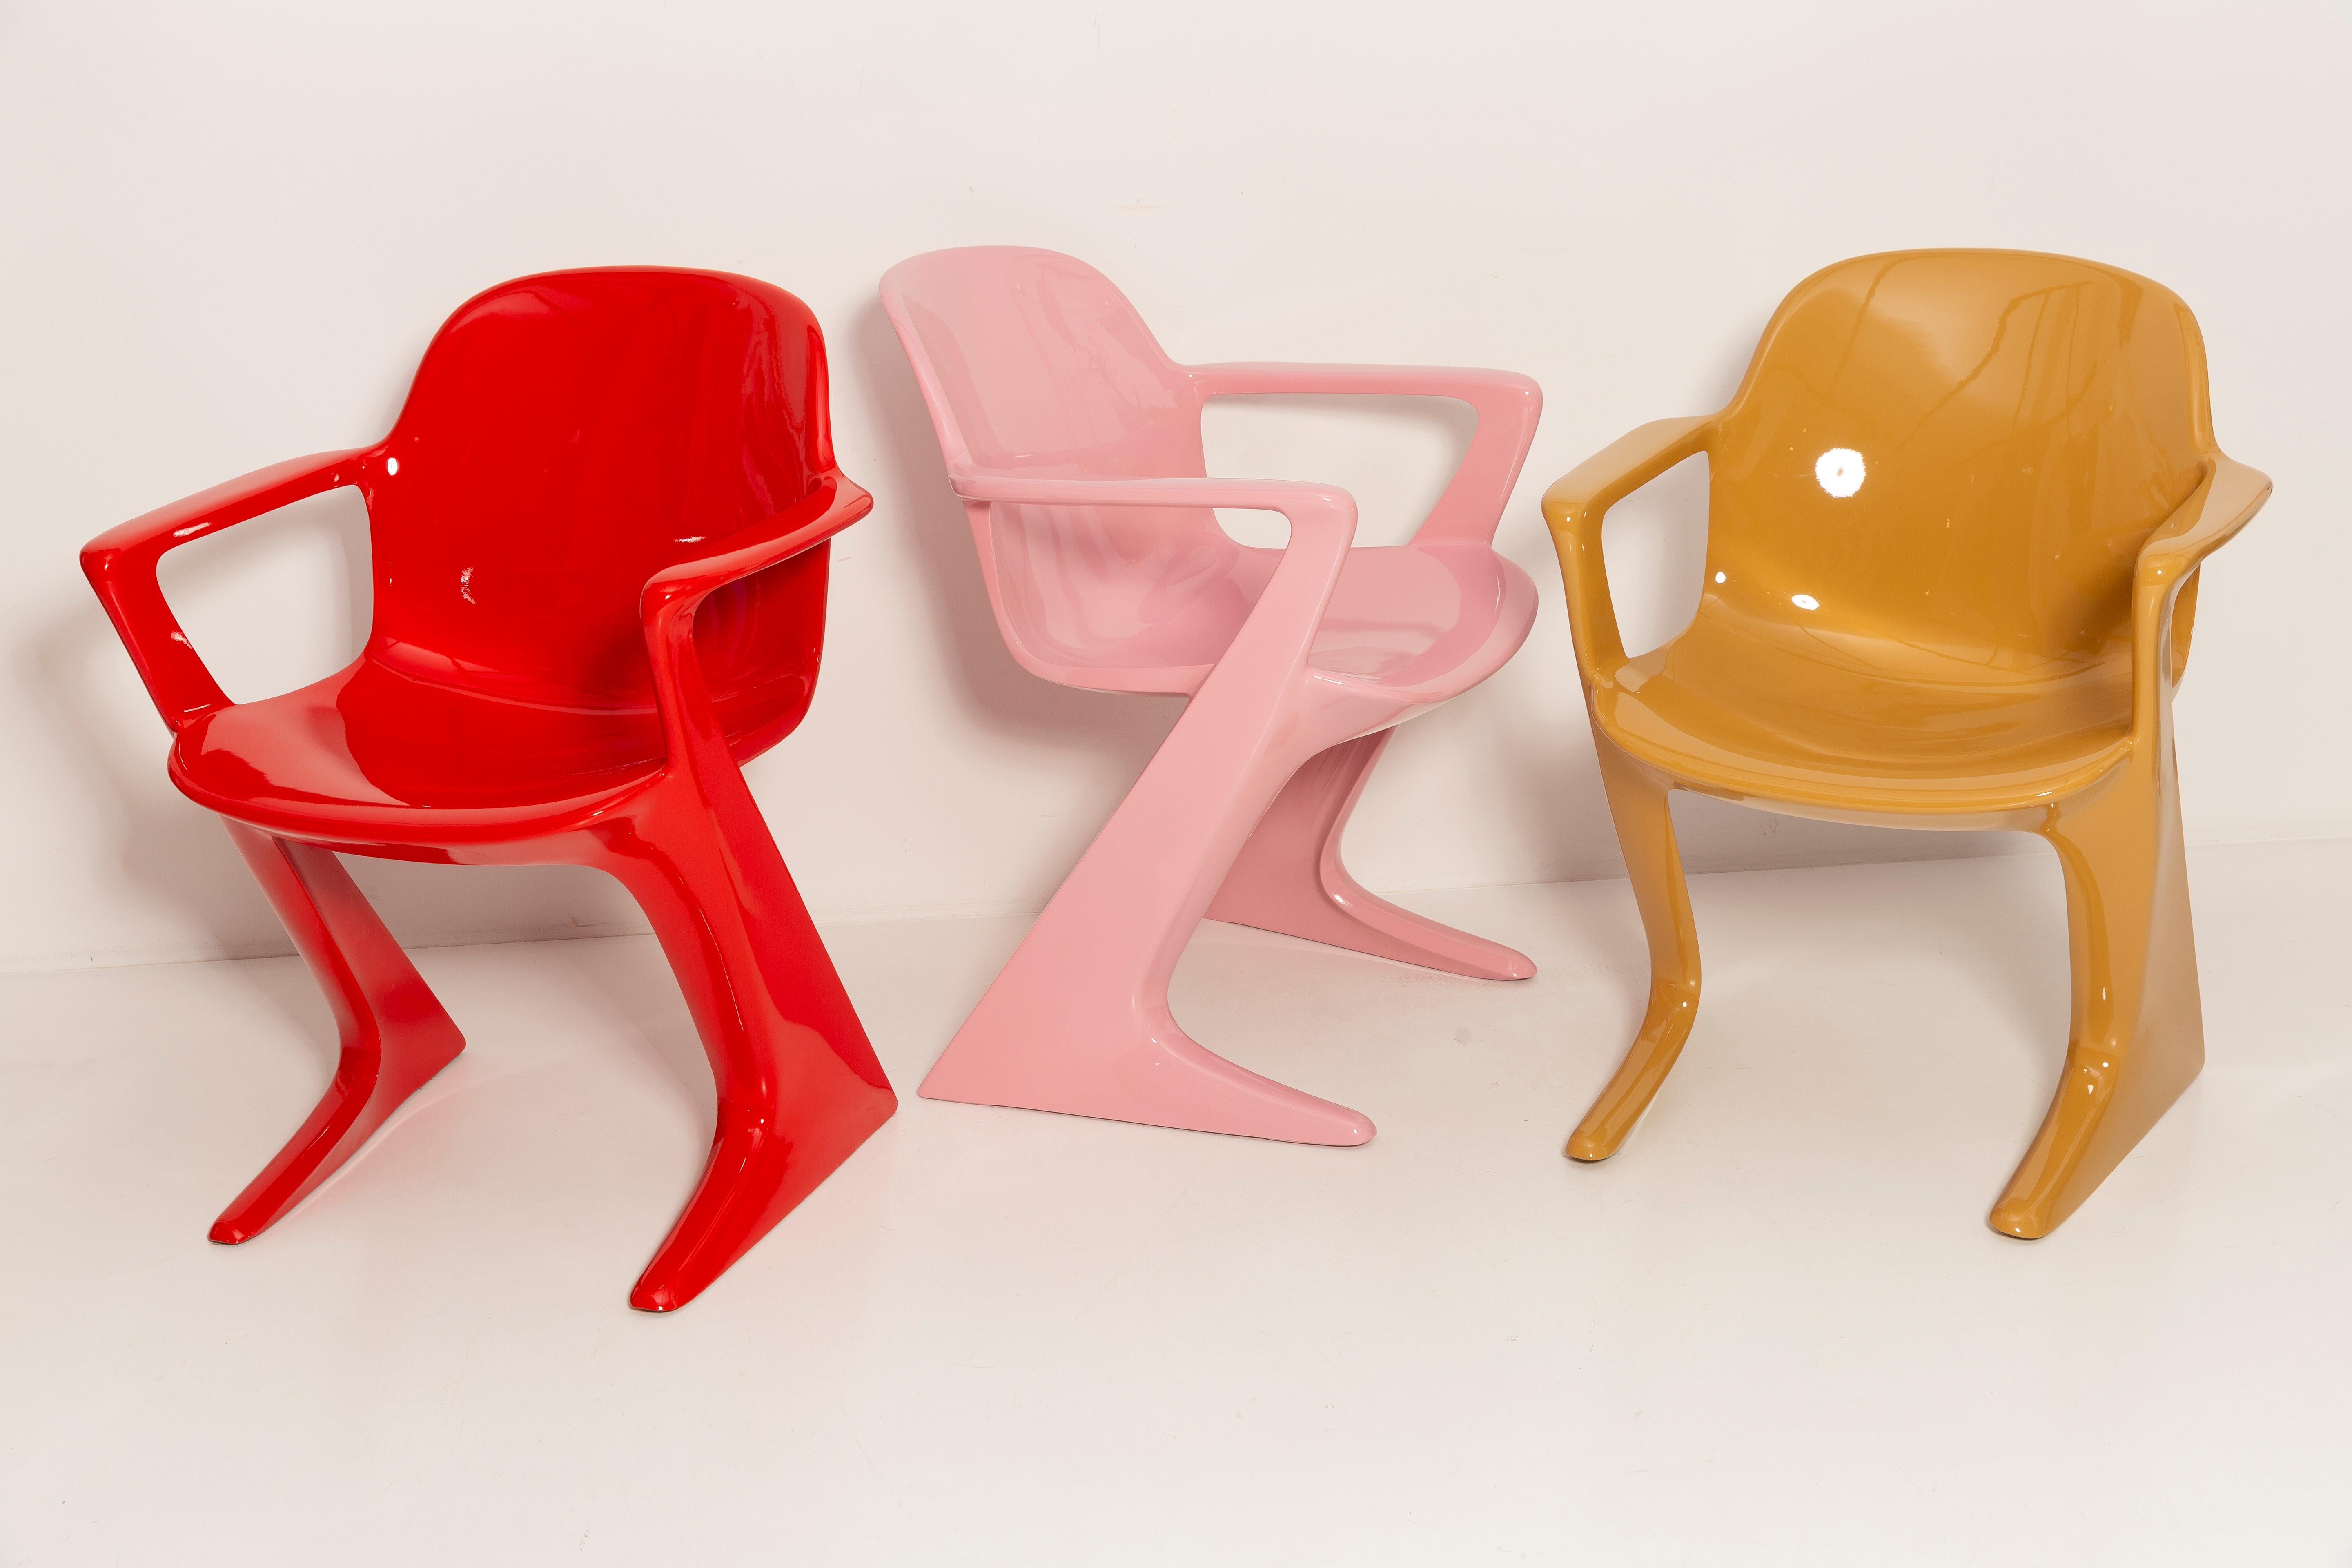 Set of Six Mid Century Kangaroo Chairs, Ernst Moeckl, Germany, 1968 For Sale 7